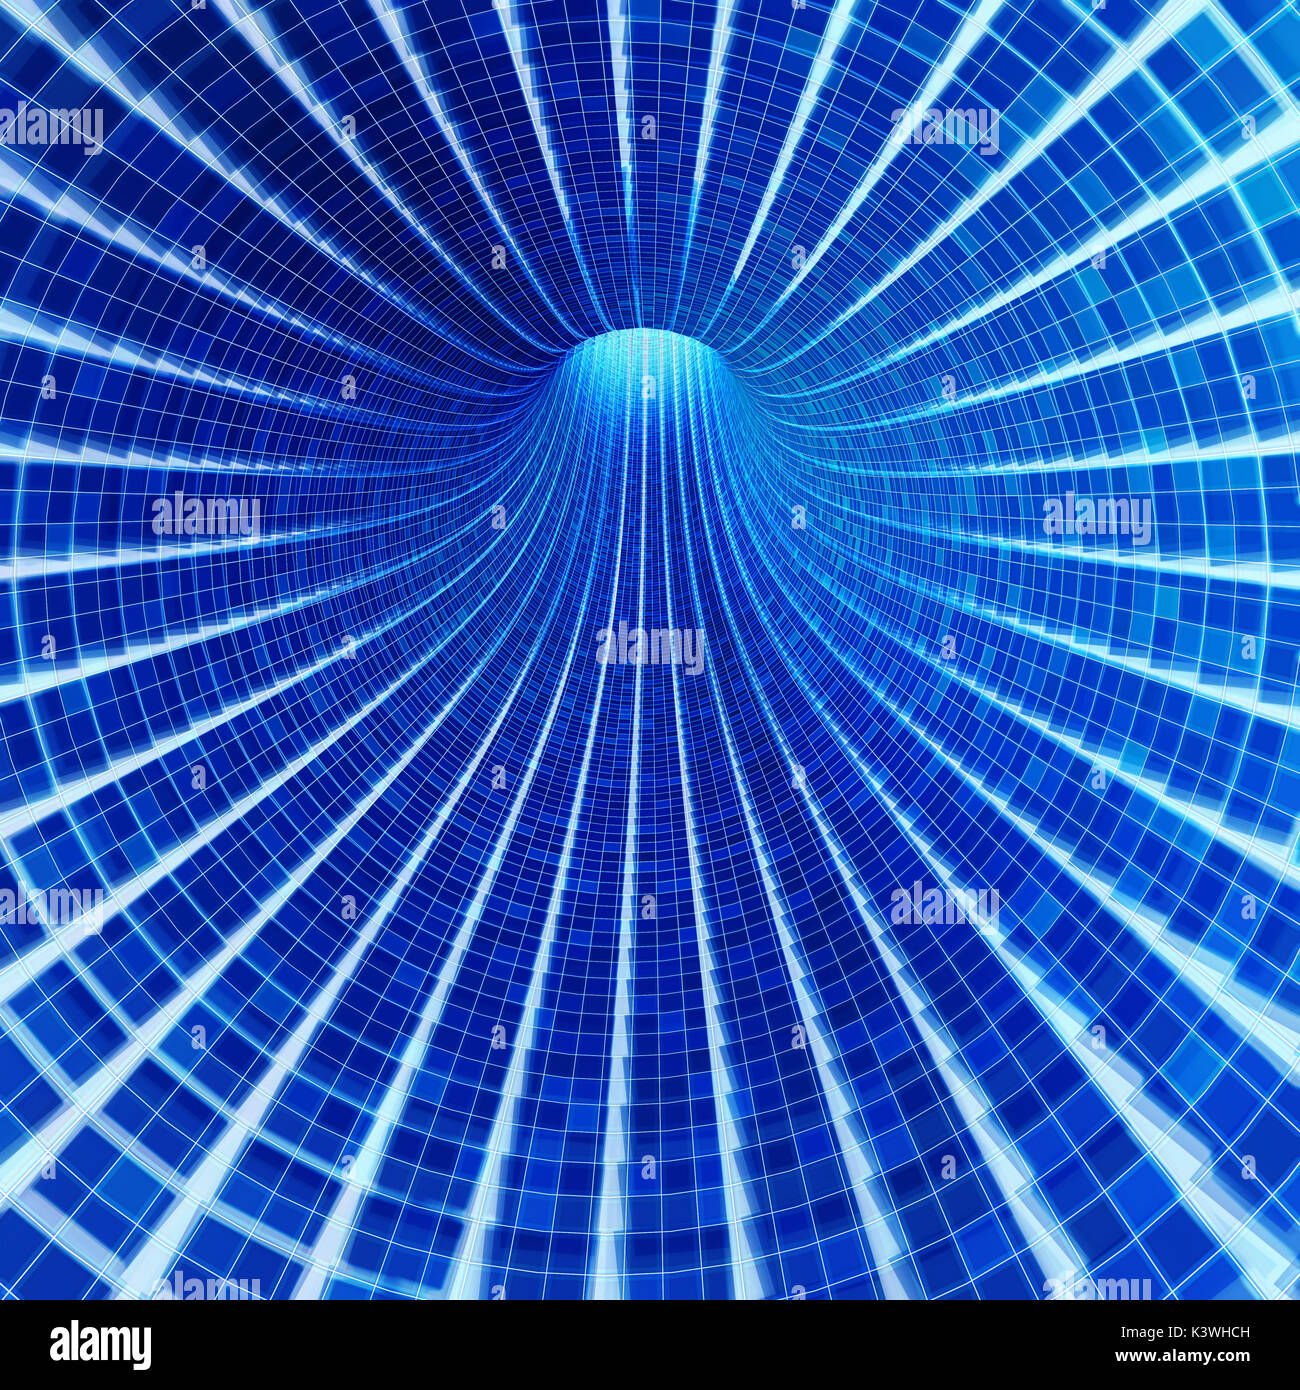 Technology tunnel graphic background 3d rendering Stock Photo